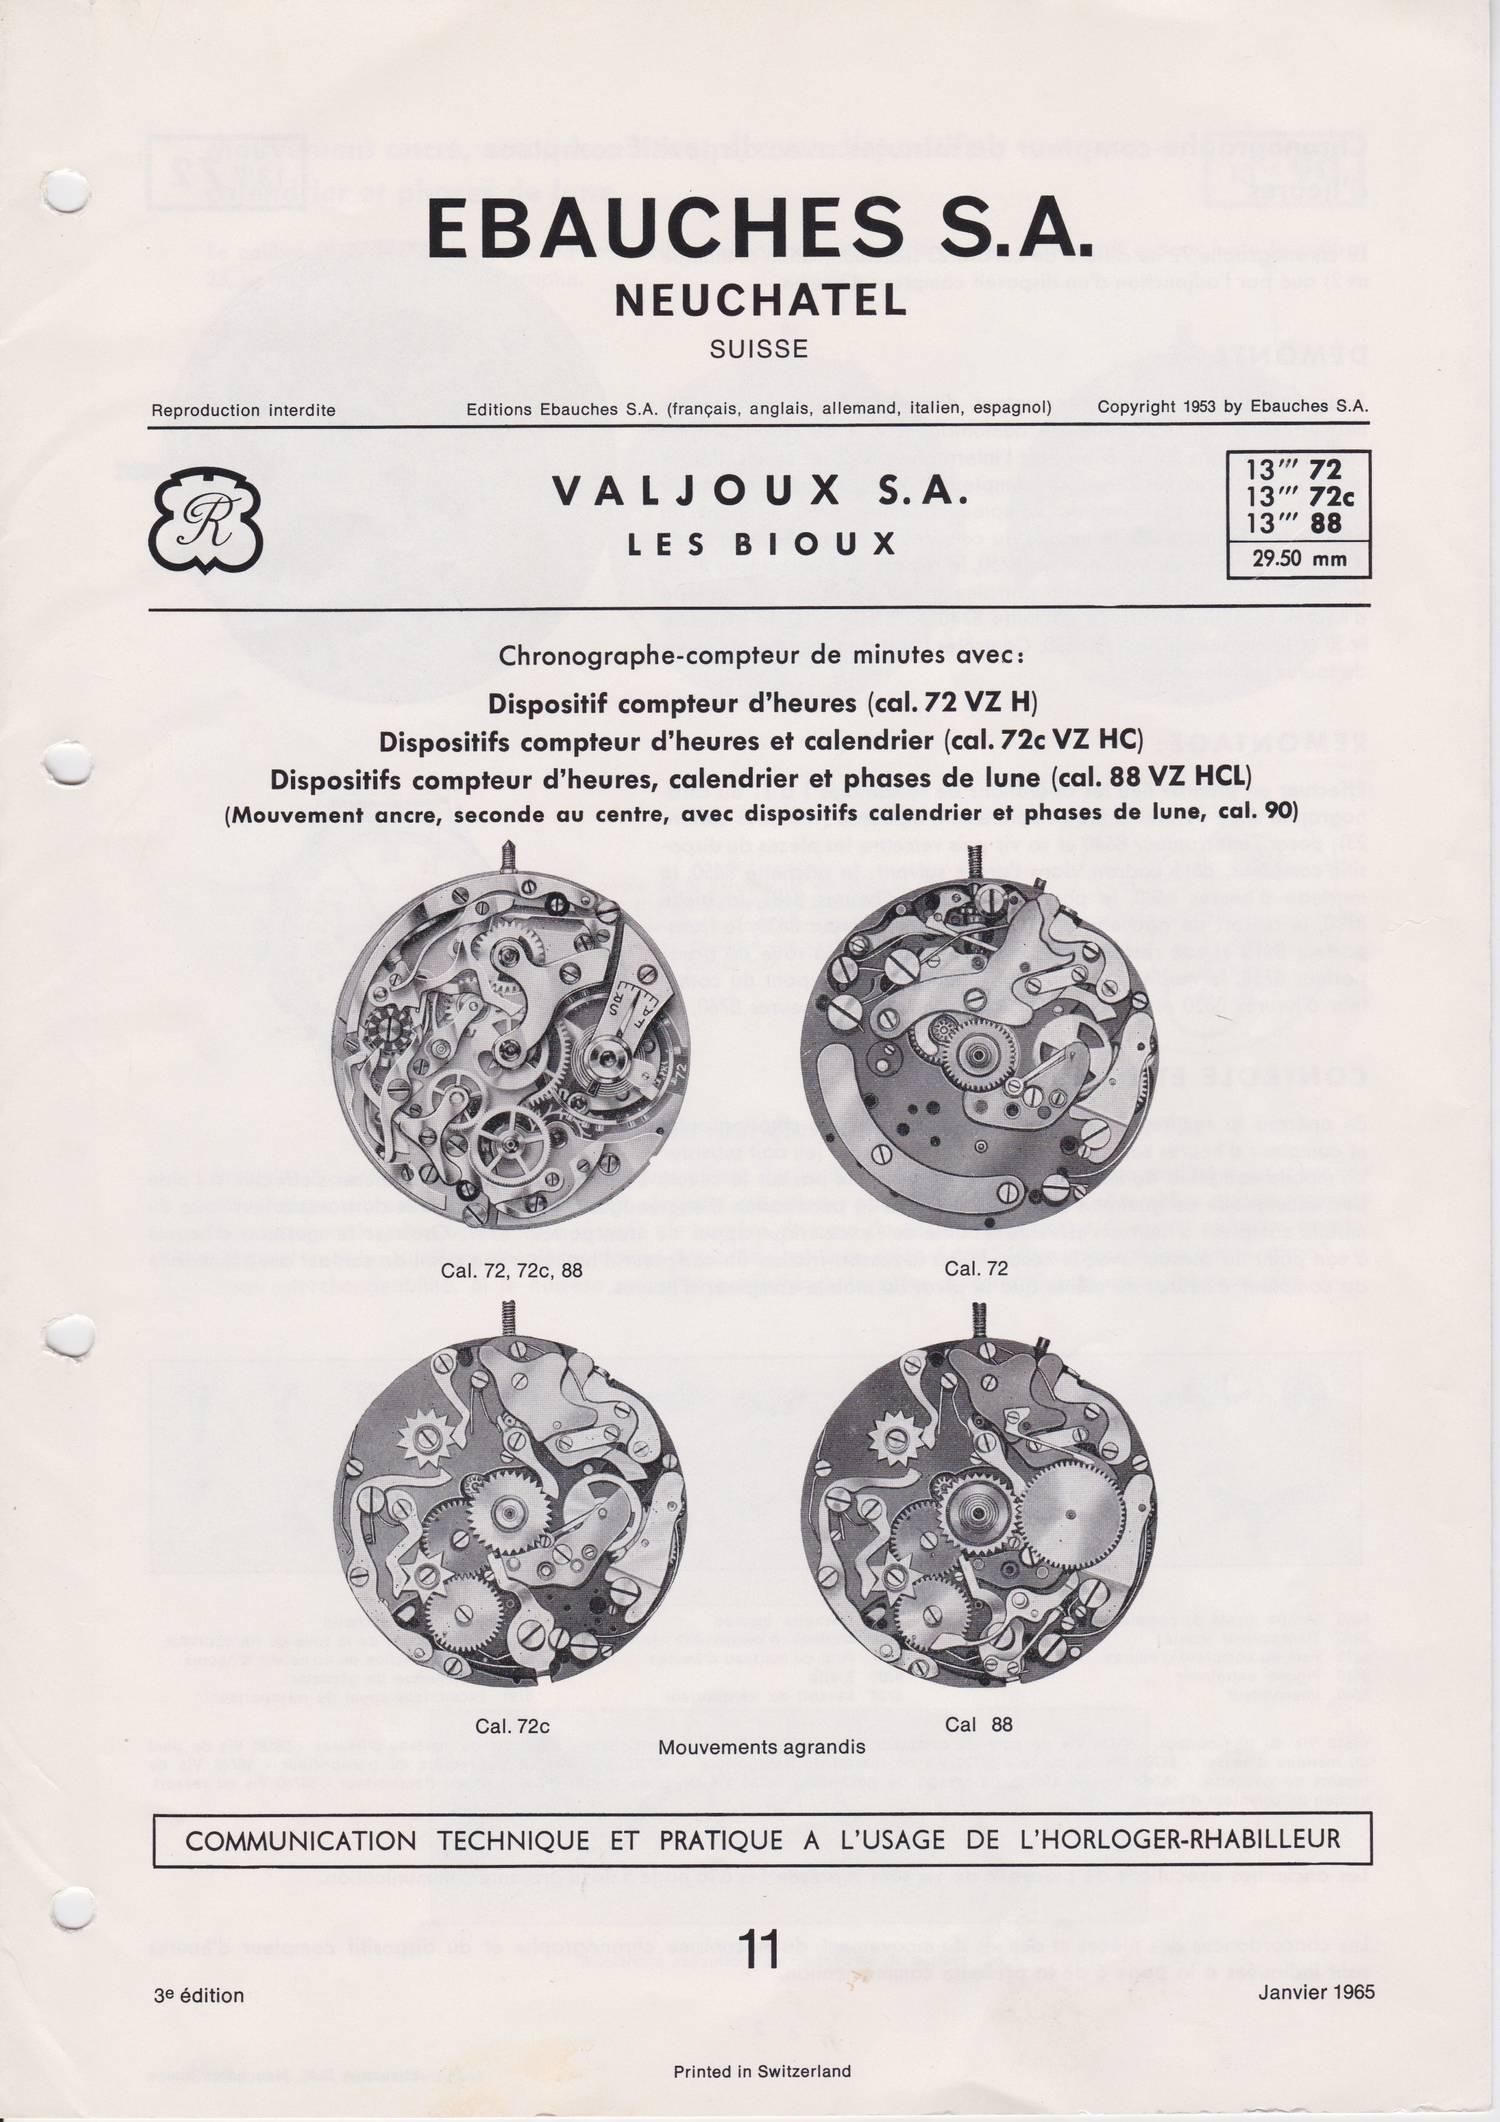 Ebauches S.A. manual showing for movements in The Role Played by ‘Collaborations’ in Watchmaking for A Collected Man London